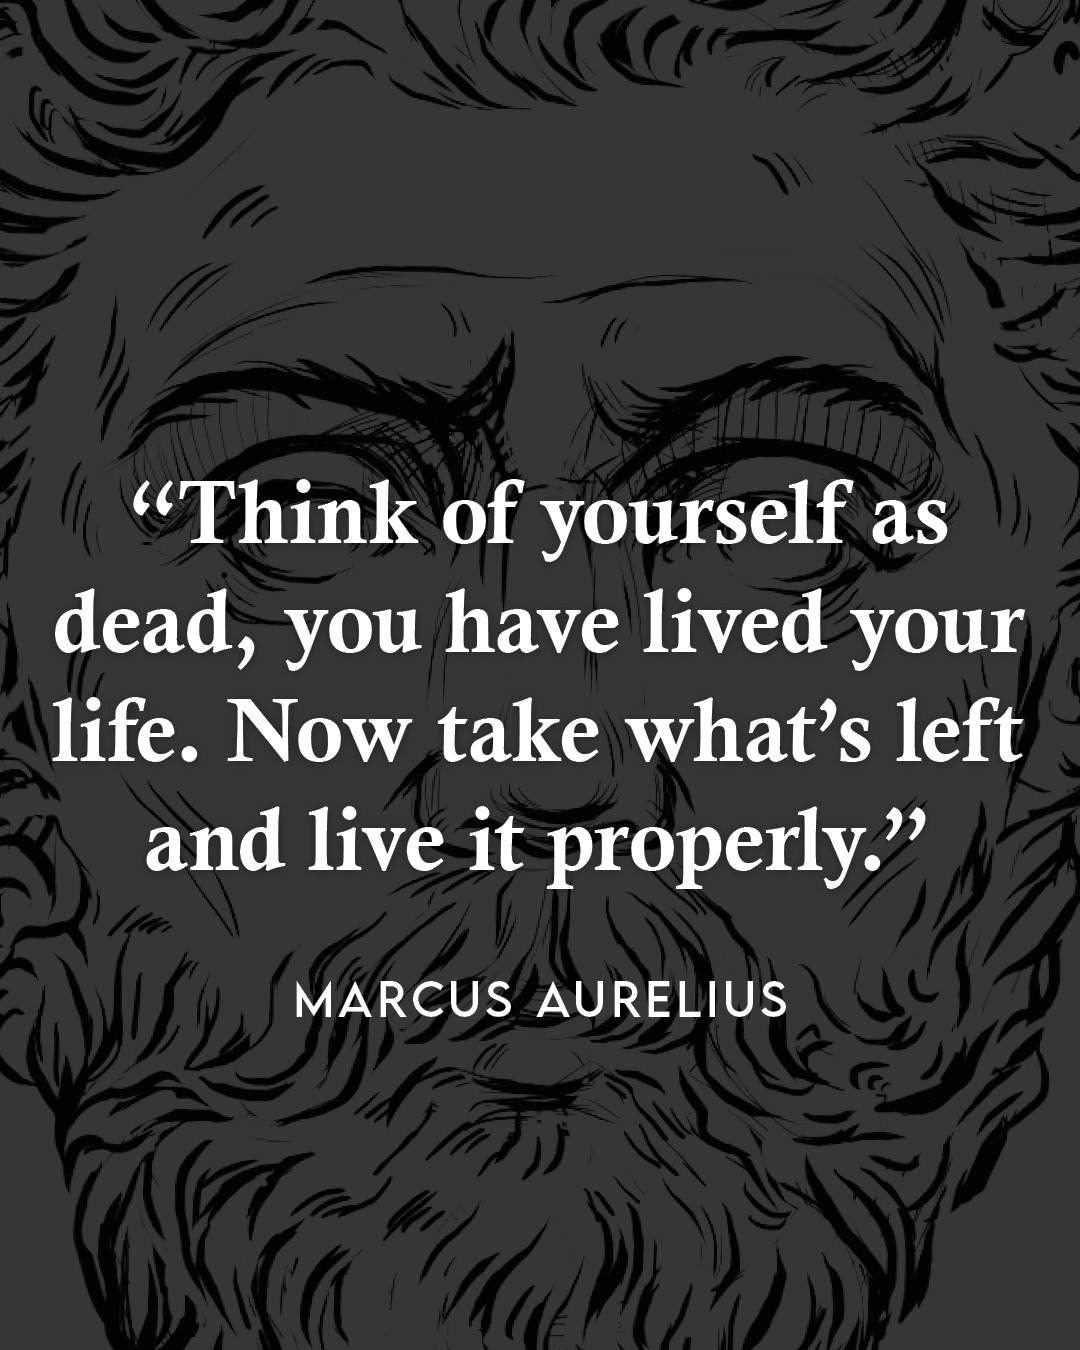 Think of yourself as dead. You have lived your life. Now take what’s left and live it properly.